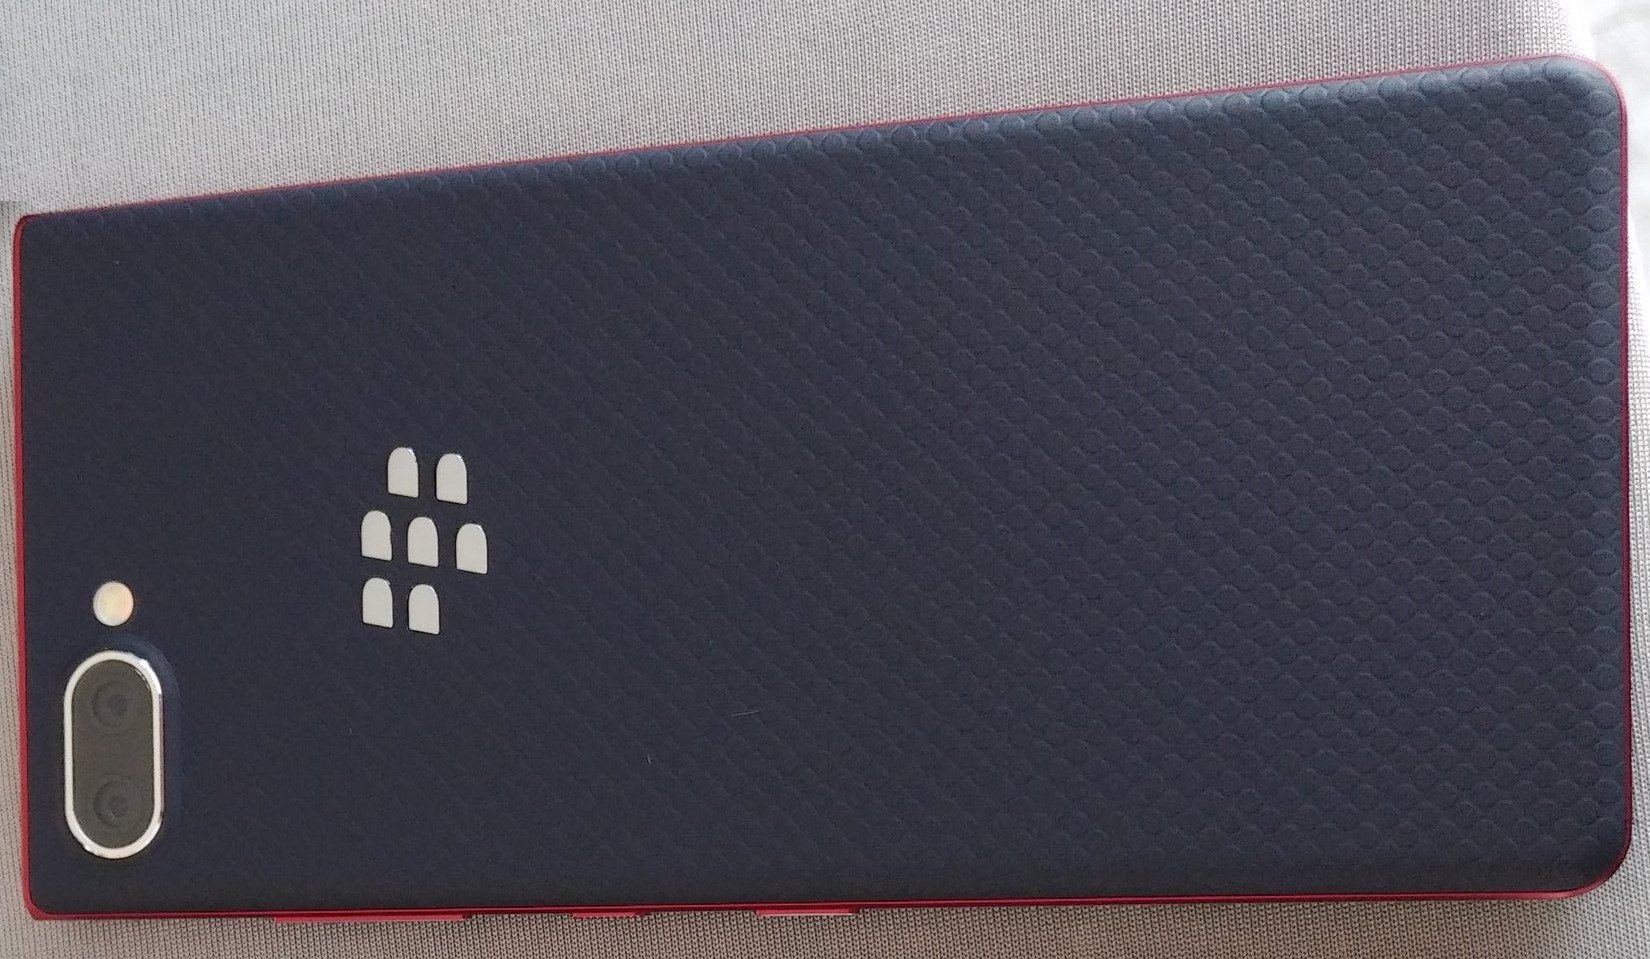 BlackBerry KEY2 Lite is coming. What do we know about it?